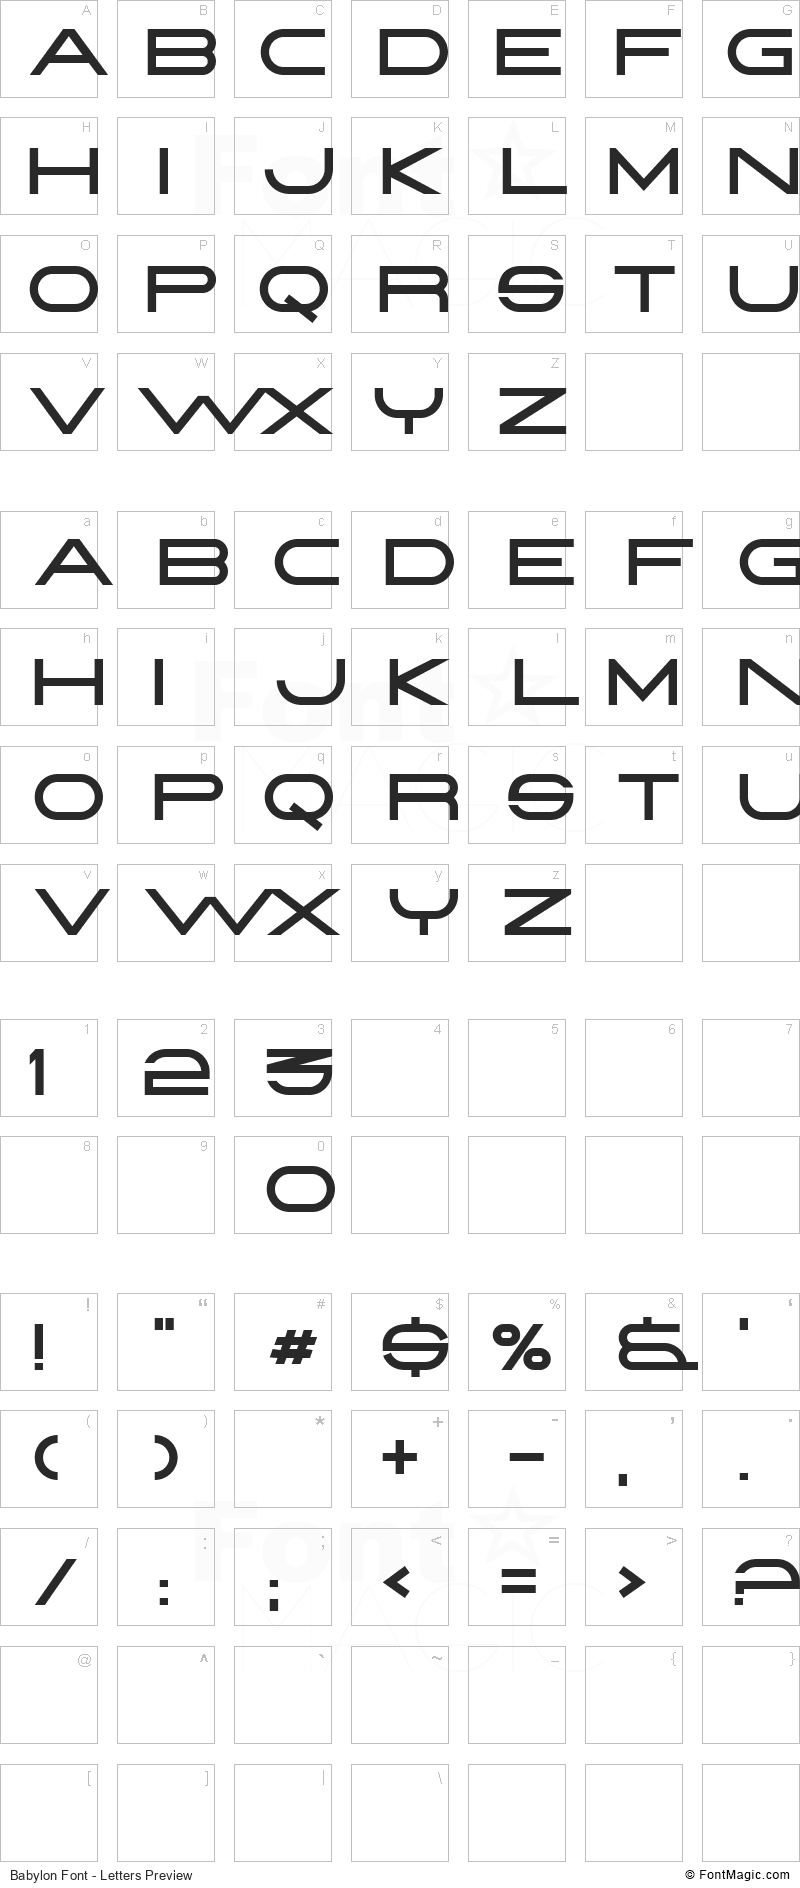 Babylon Font - All Latters Preview Chart